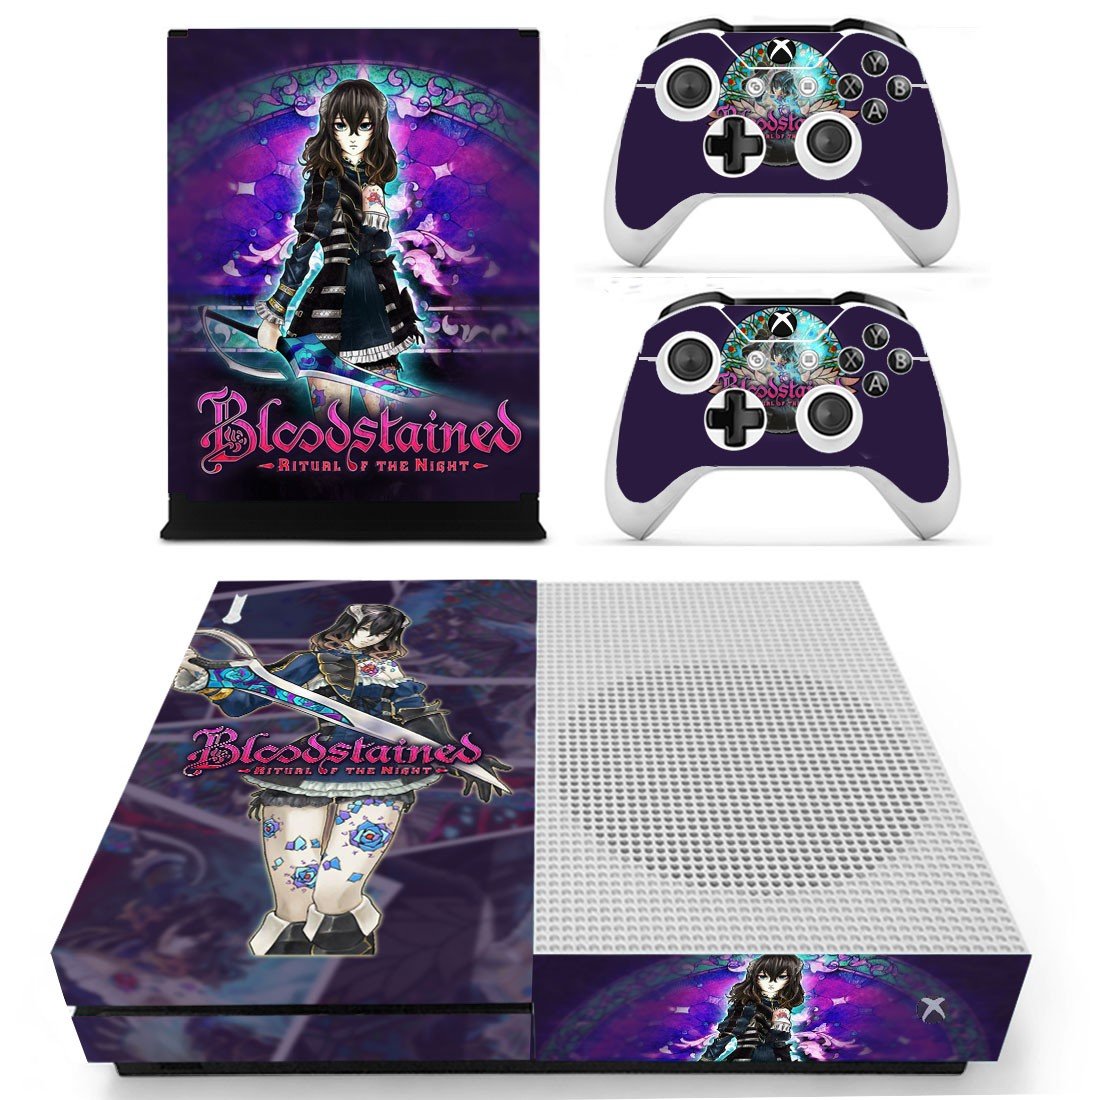 Xbox One S And Controllers Skin Cover Bloodstained Ritual of the Night